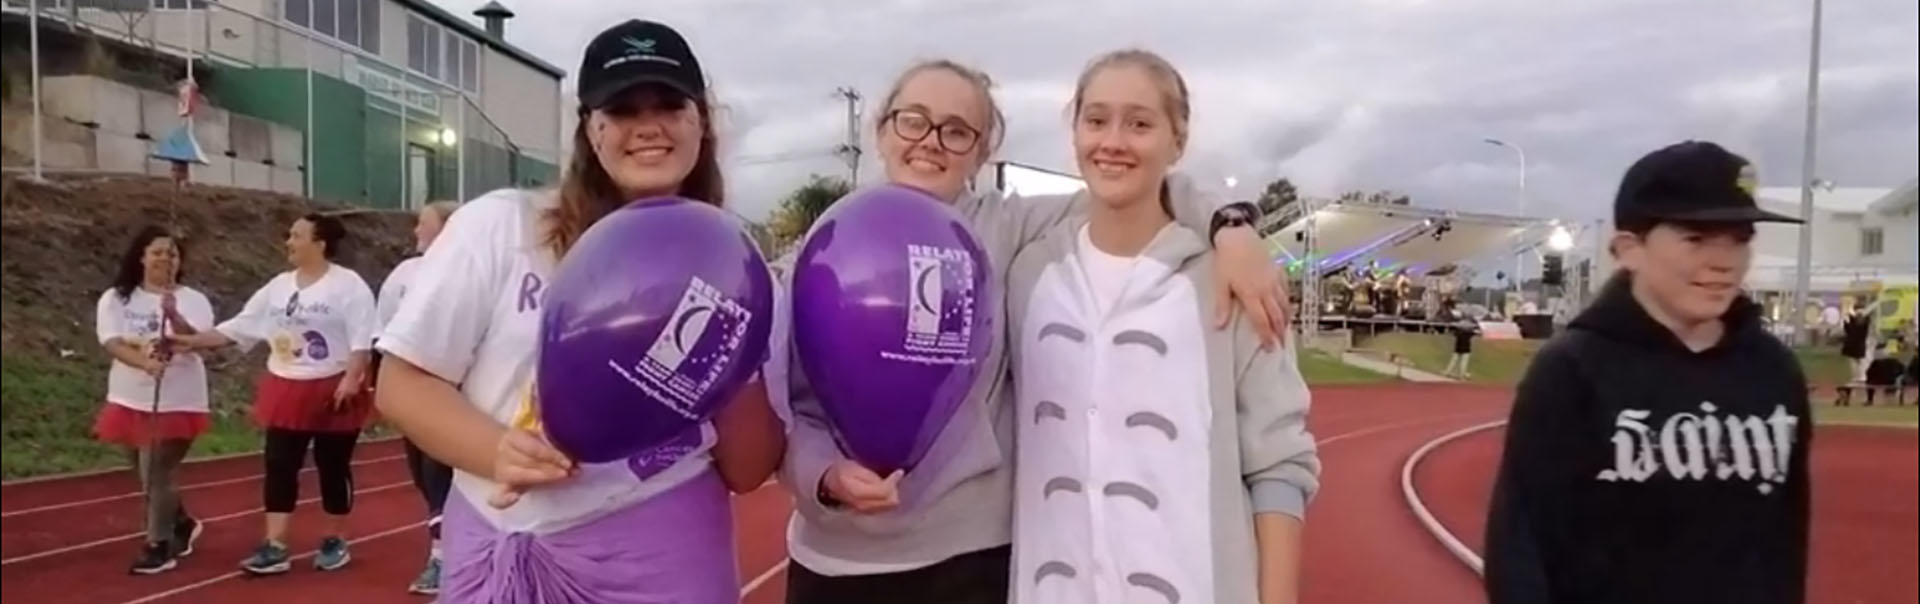 Relay for Life 2021 - Remarkable Together